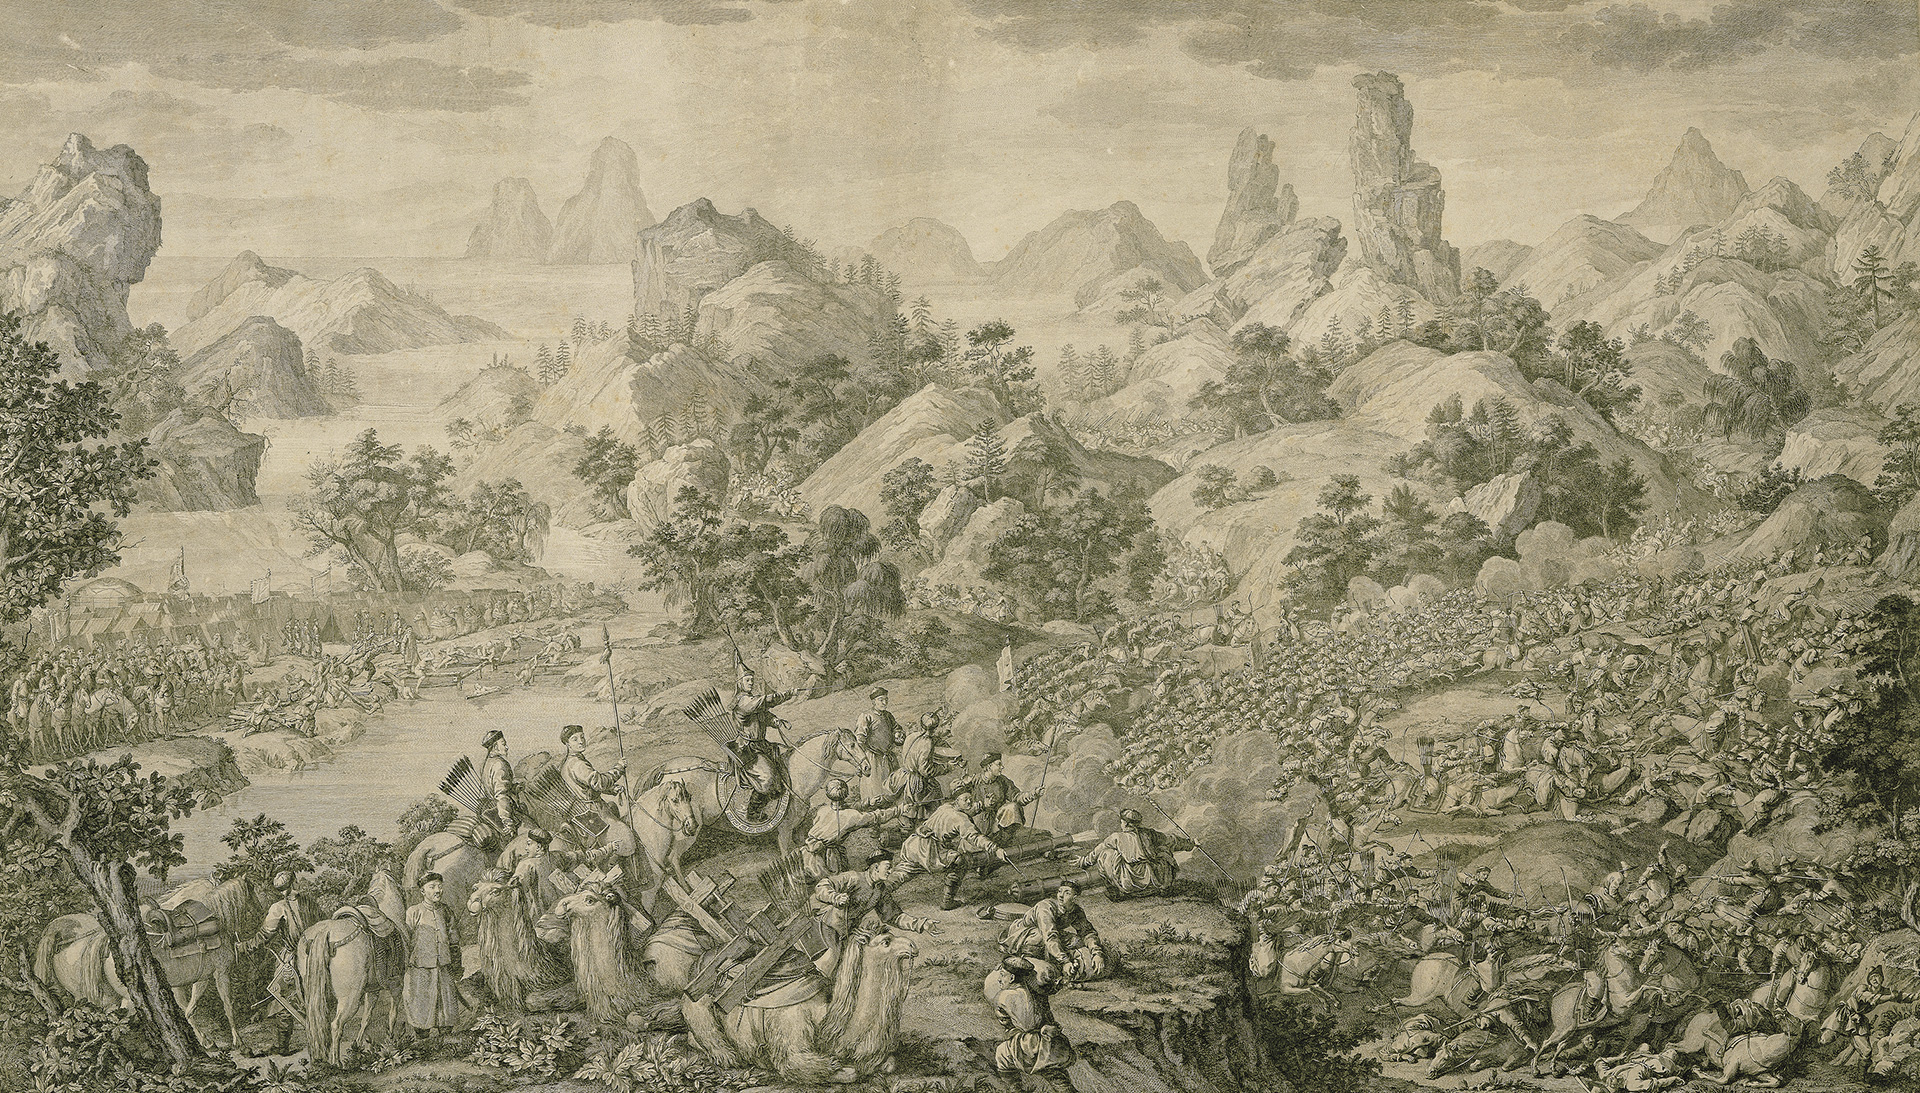 Copperplate engraving of the "Lifting of the Siege at the Black Water River" from Victory in the Pacification of Dzungars and Muslims